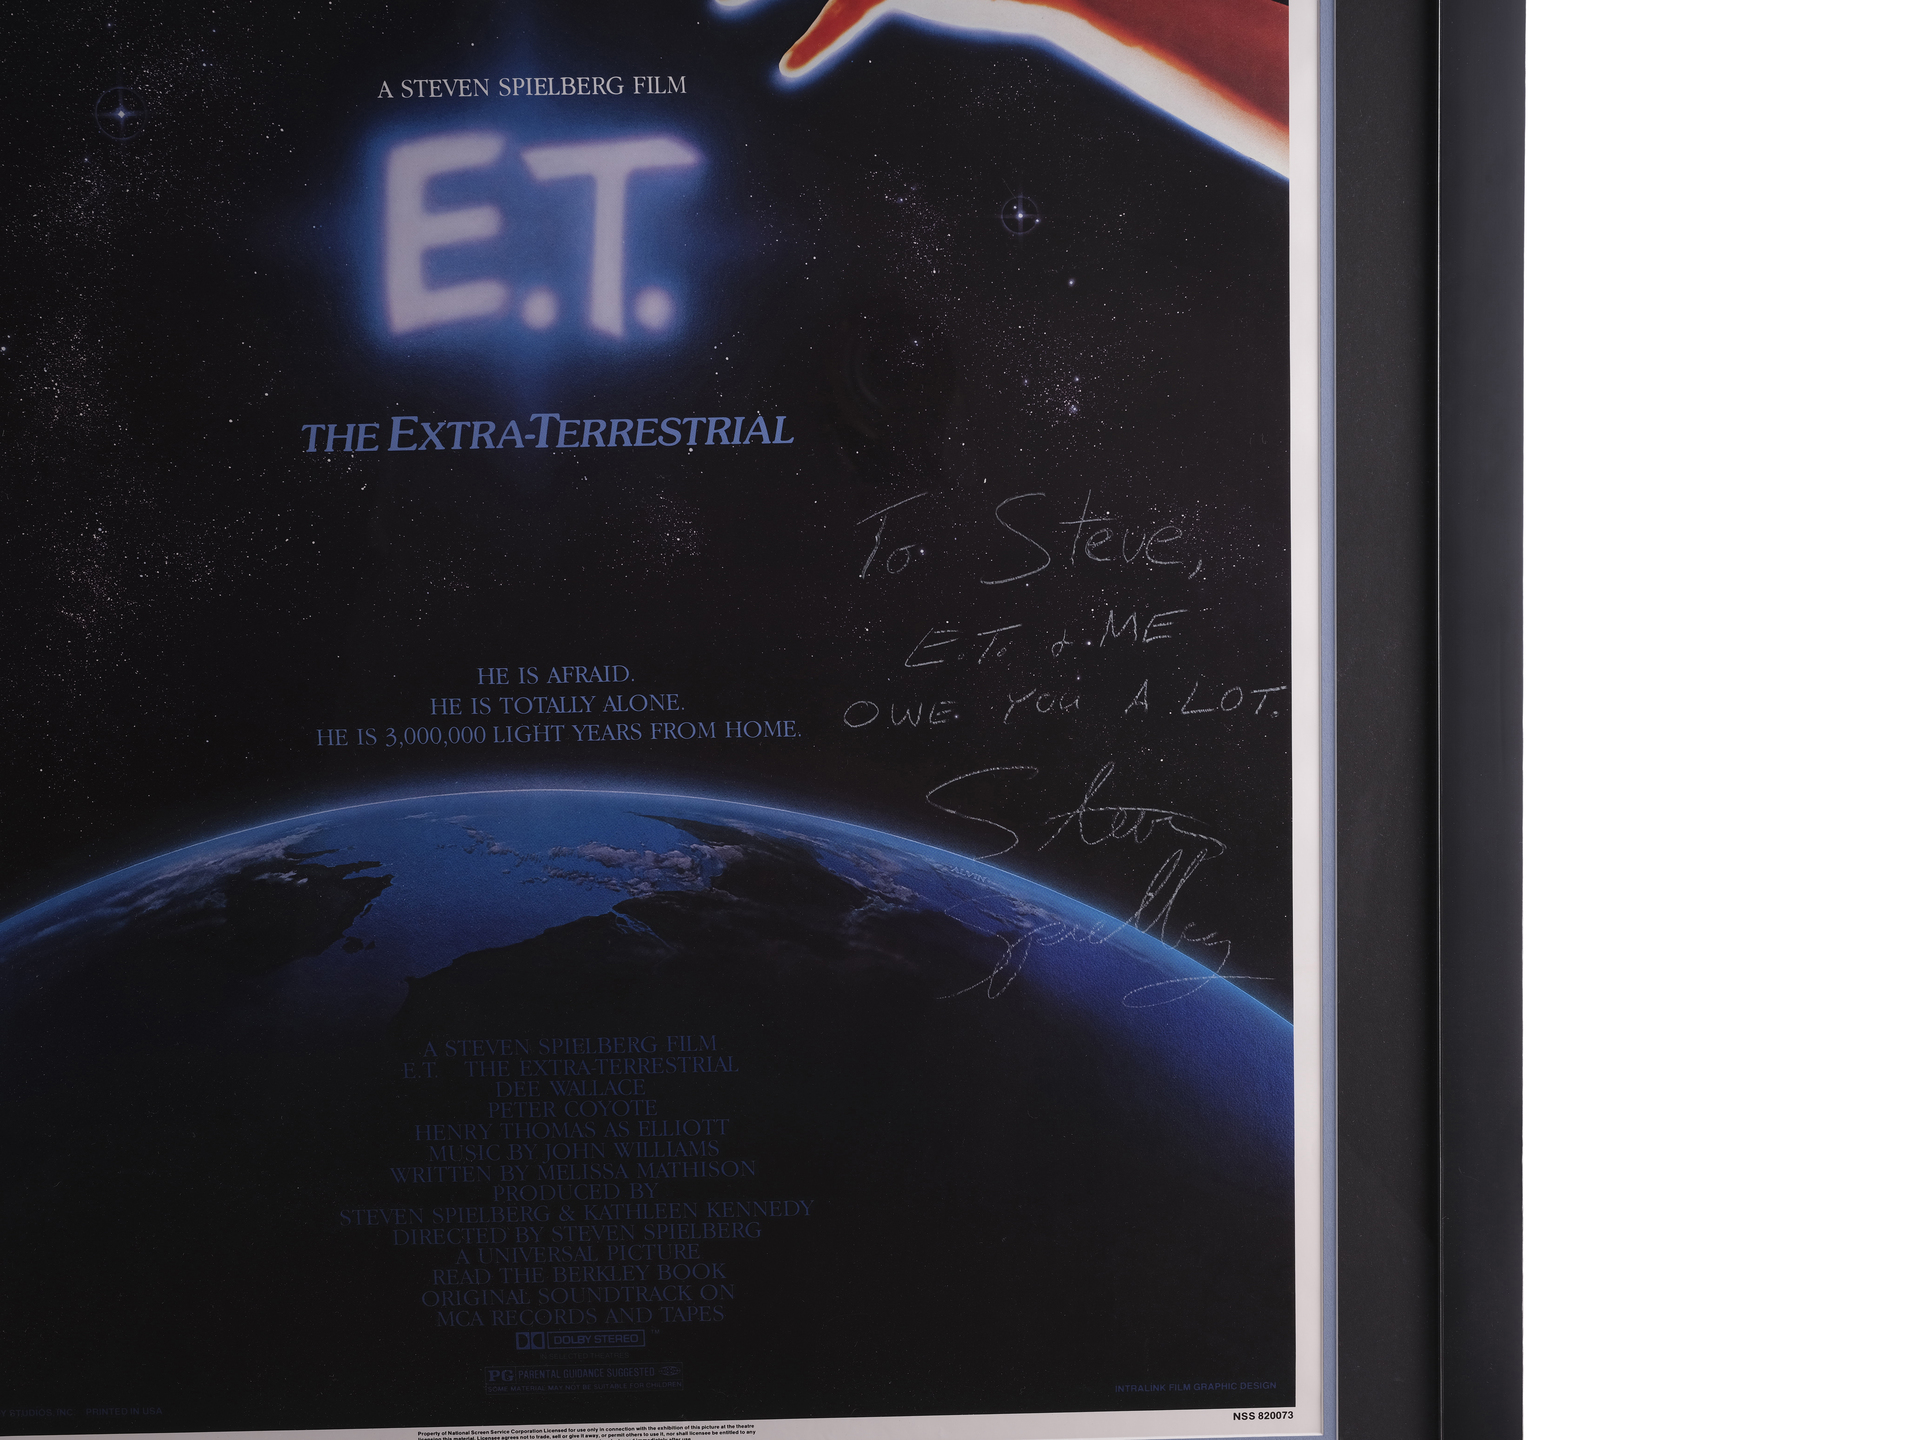 E.T. THE EXTRA-TERRESTRIAL (1982) - Framed Steven Spielberg-Autographed "Touching Fingers" One-Sheet - Image 4 of 5